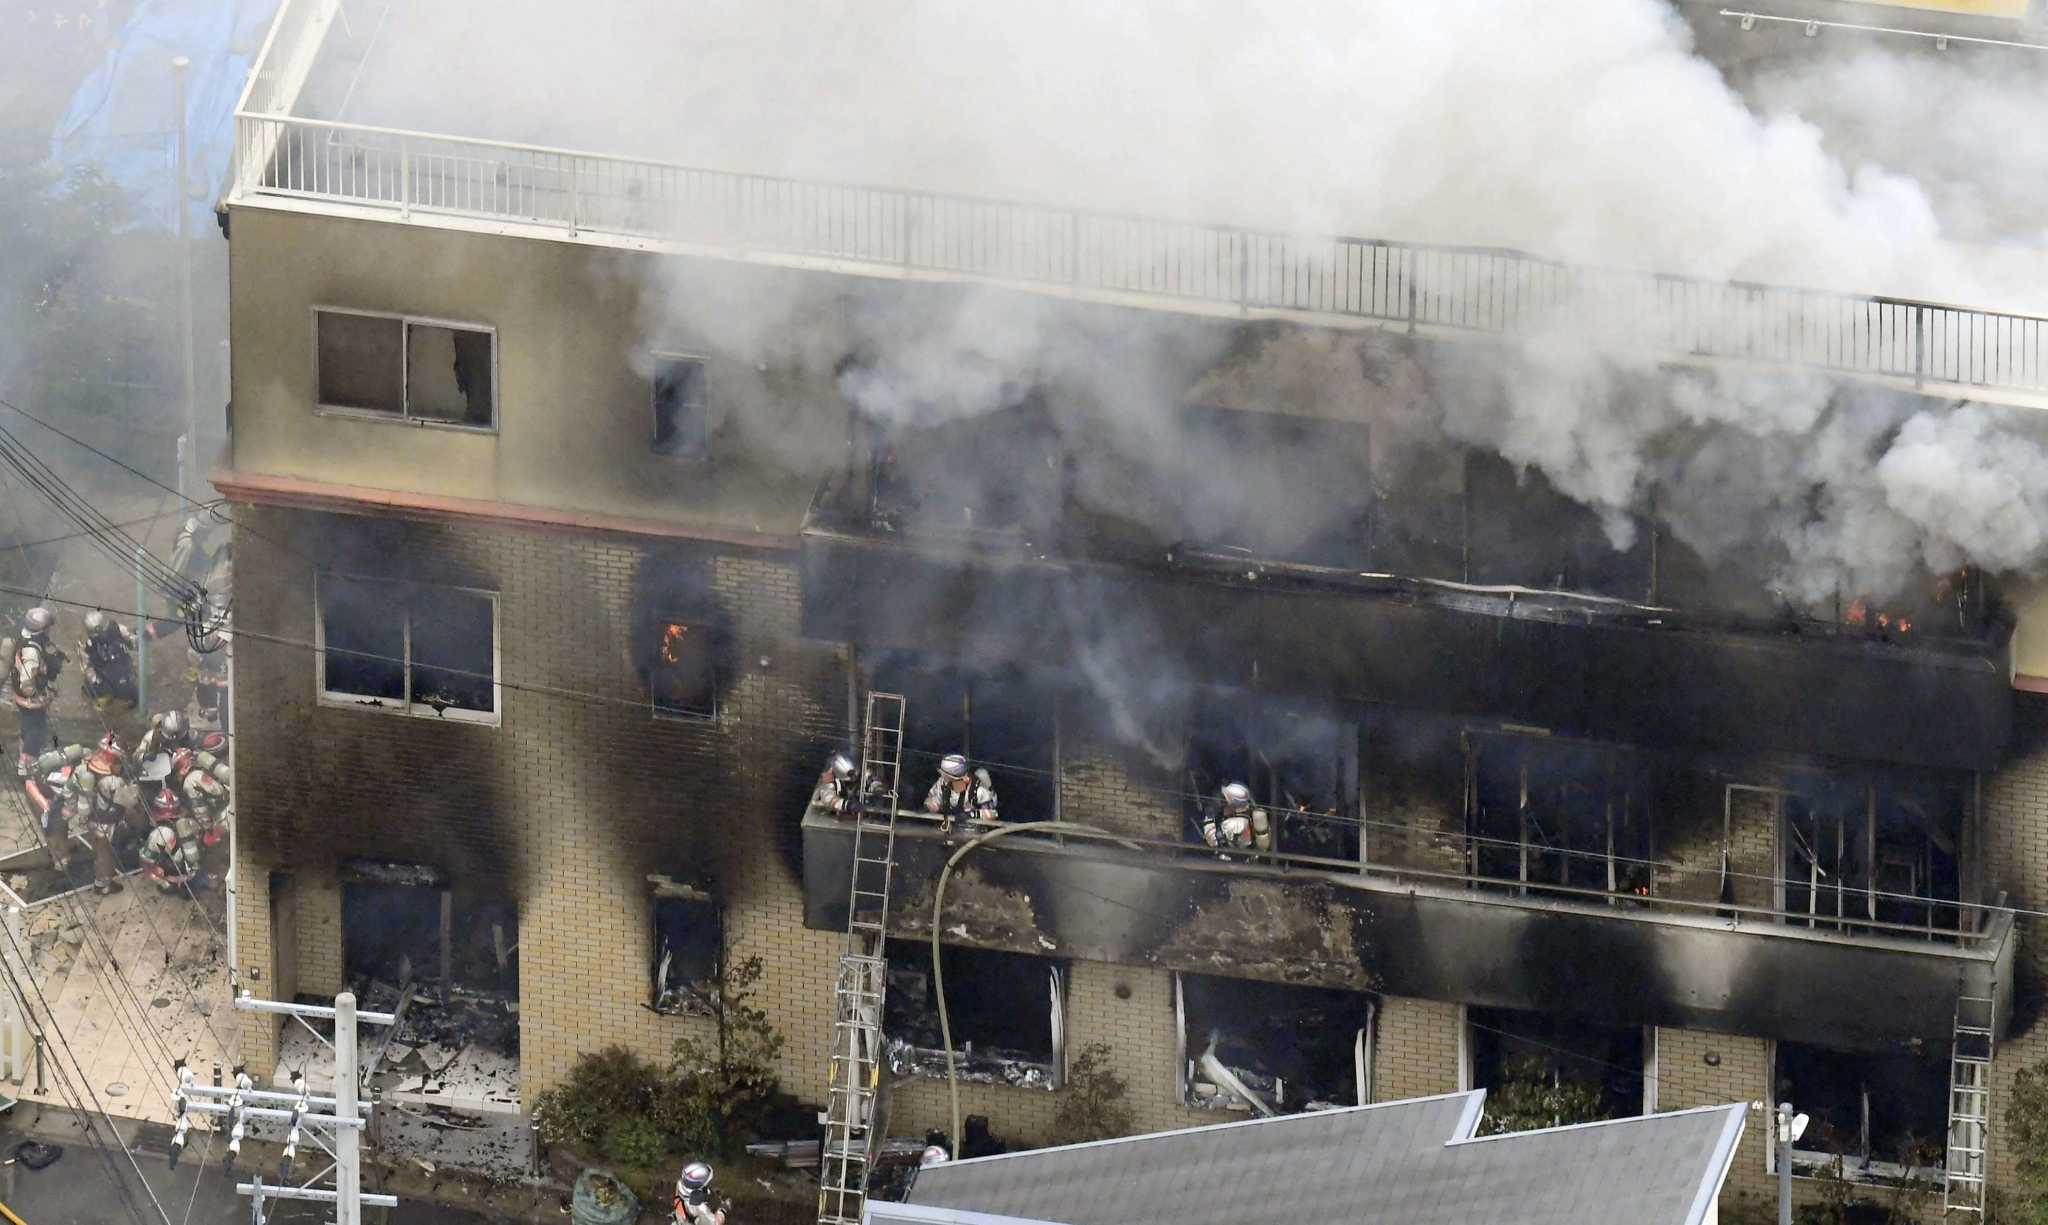 Firefighters respond to a building fire of Kyoto Animation in Kyoto, western Japan, Thursday, July 18, 2019. The fire broke out in the three-story building in Japan's ancient capital of Kyoto, after a suspect sprayed an unidentified liquid to accelerate the blaze, Kyoto prefectural police and fire department officials said.(Kyodo News via AP)